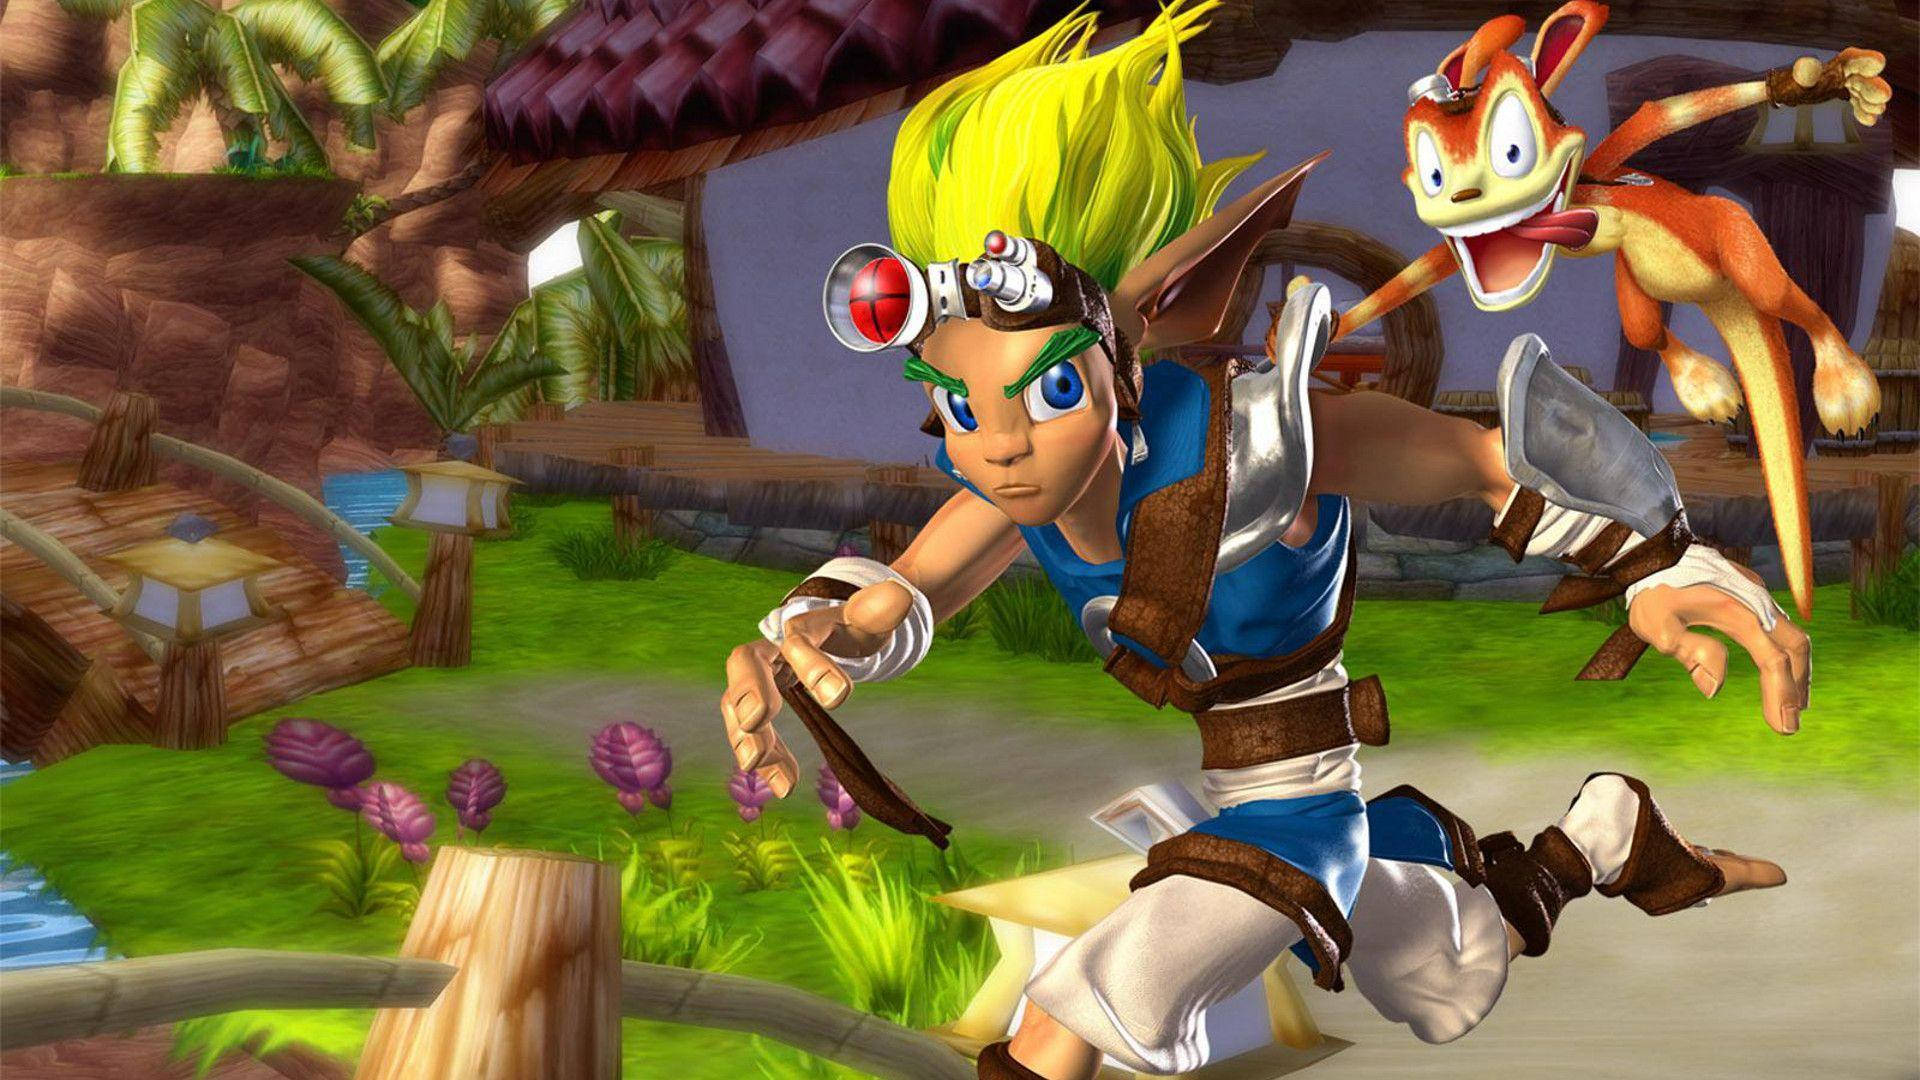 Running Jak And Daxter In A Forest Wallpaper